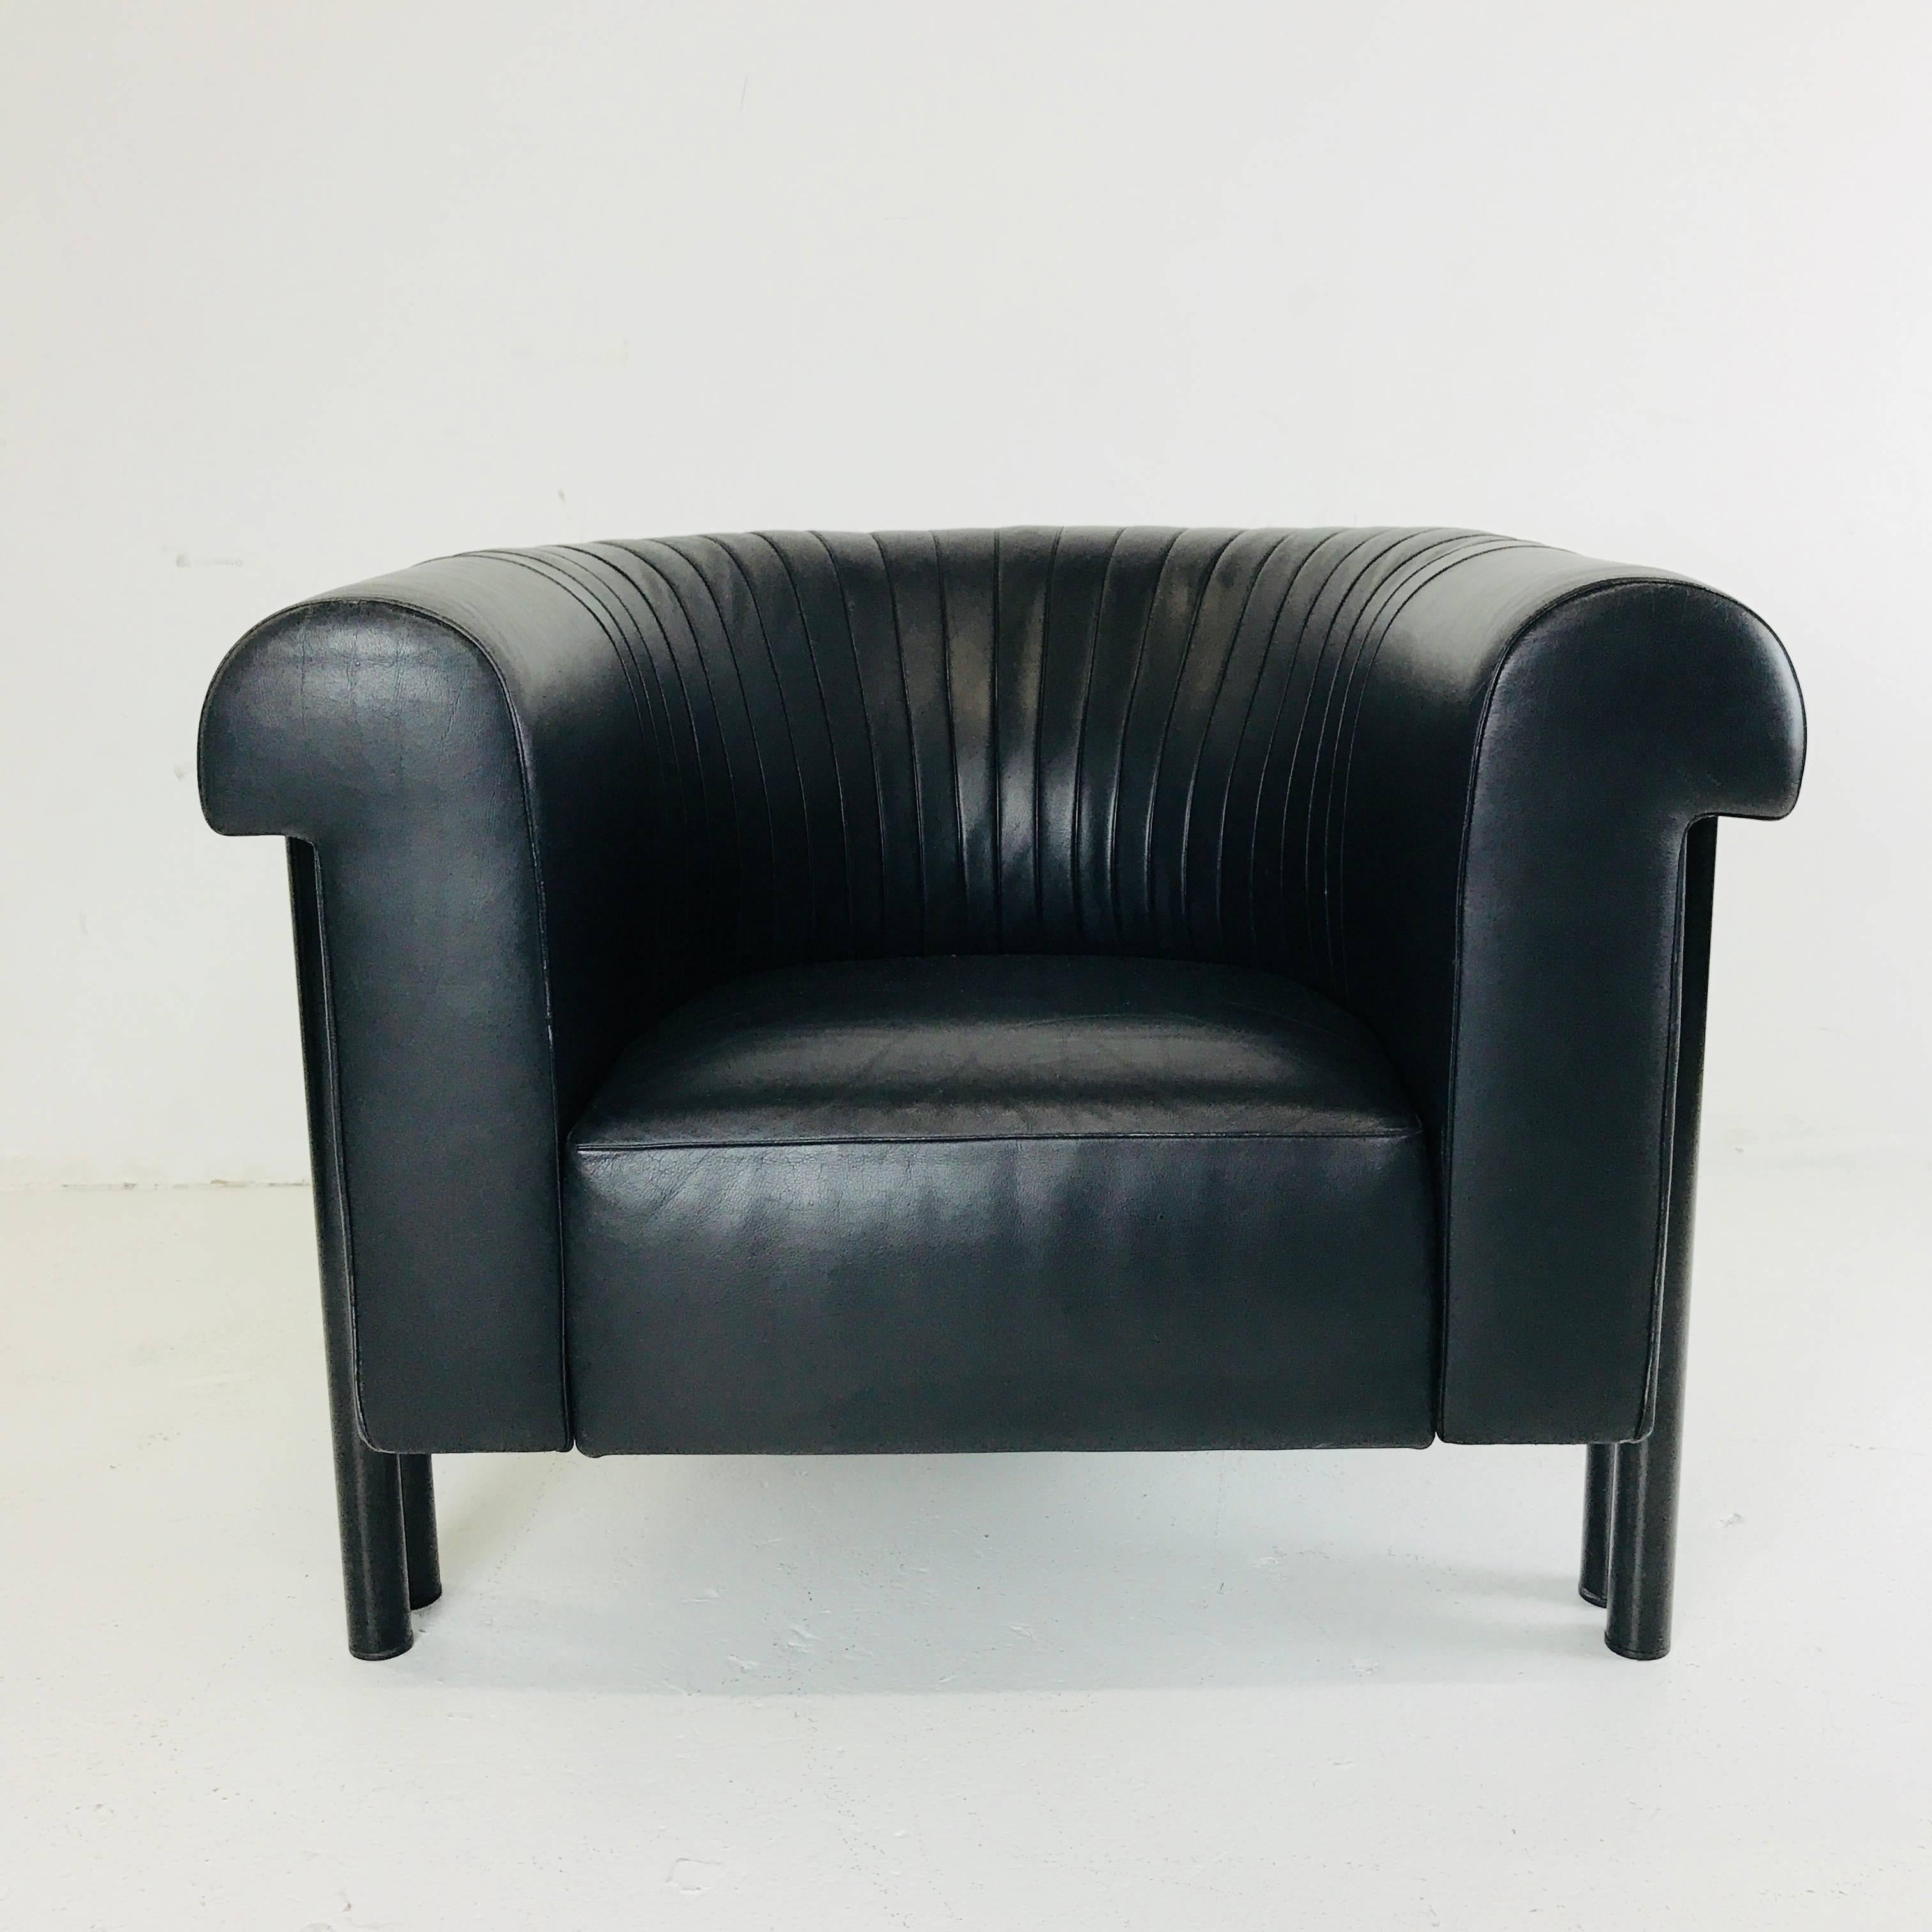 Swiss Pair of Black Leather Lounge Armchairs by De Sede